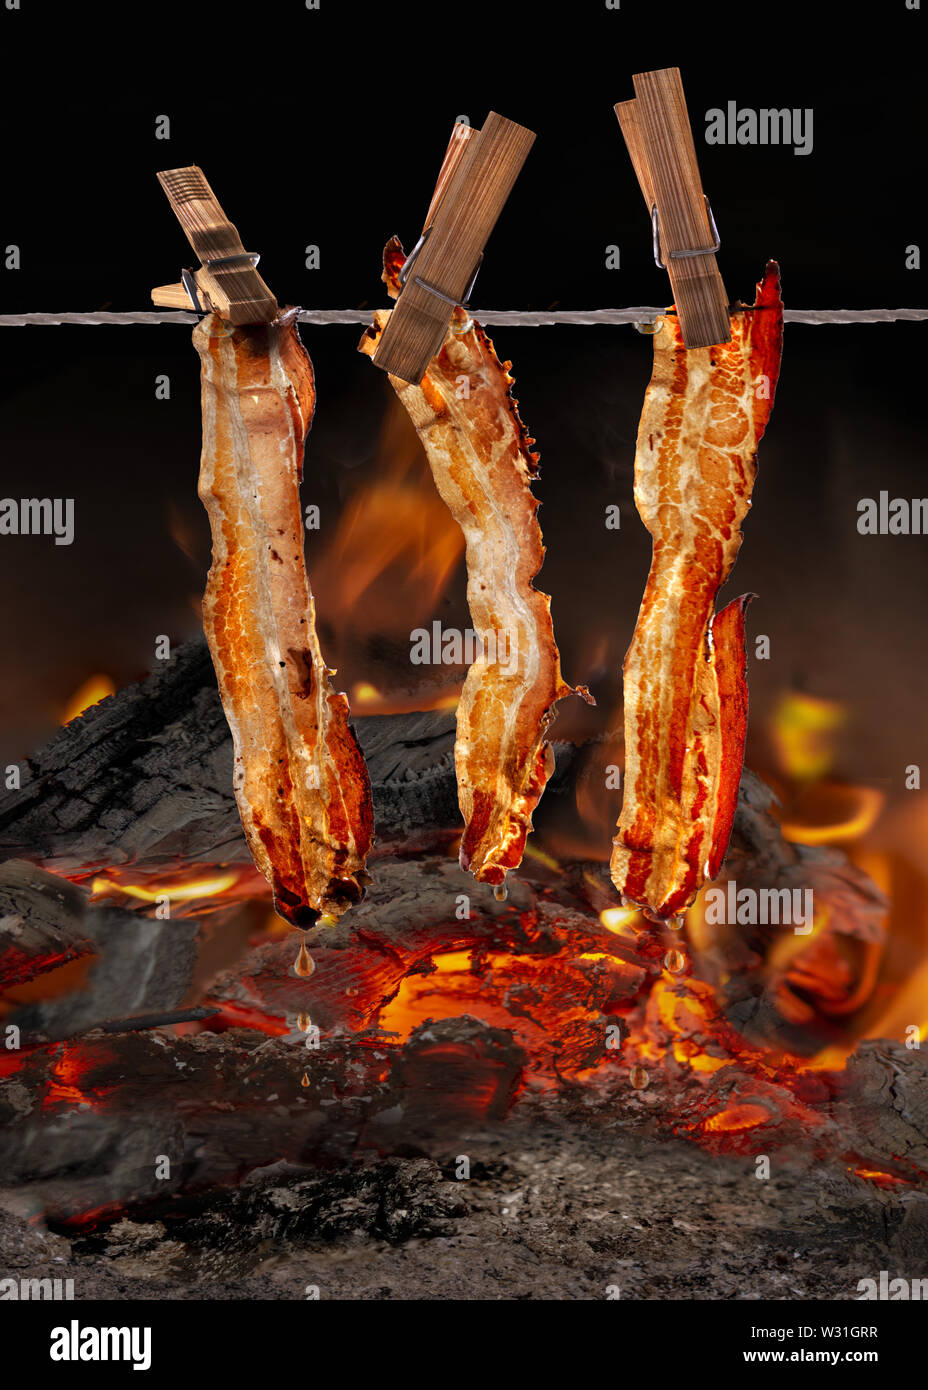 raosting and smopking on open fire with pork belly bacon spareribs and chicken legs Stock Photo